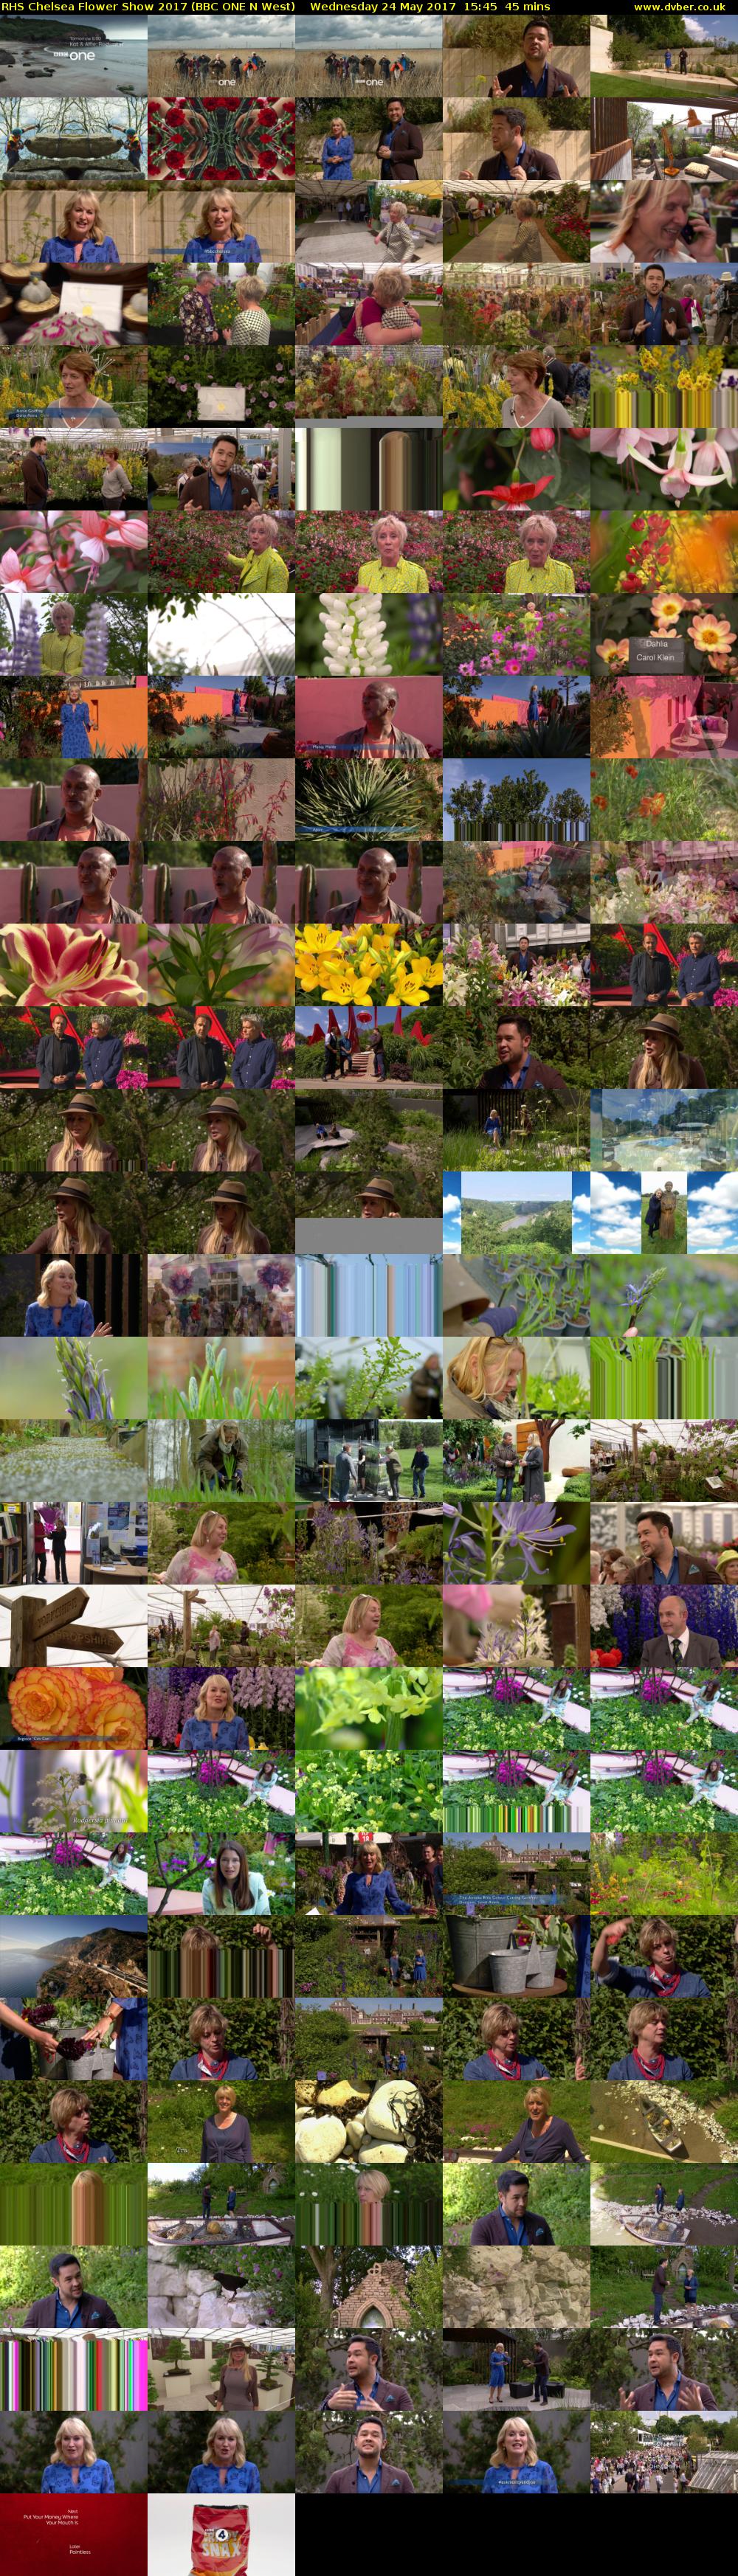 RHS Chelsea Flower Show 2017 (BBC ONE N West) Wednesday 24 May 2017 15:45 - 16:30